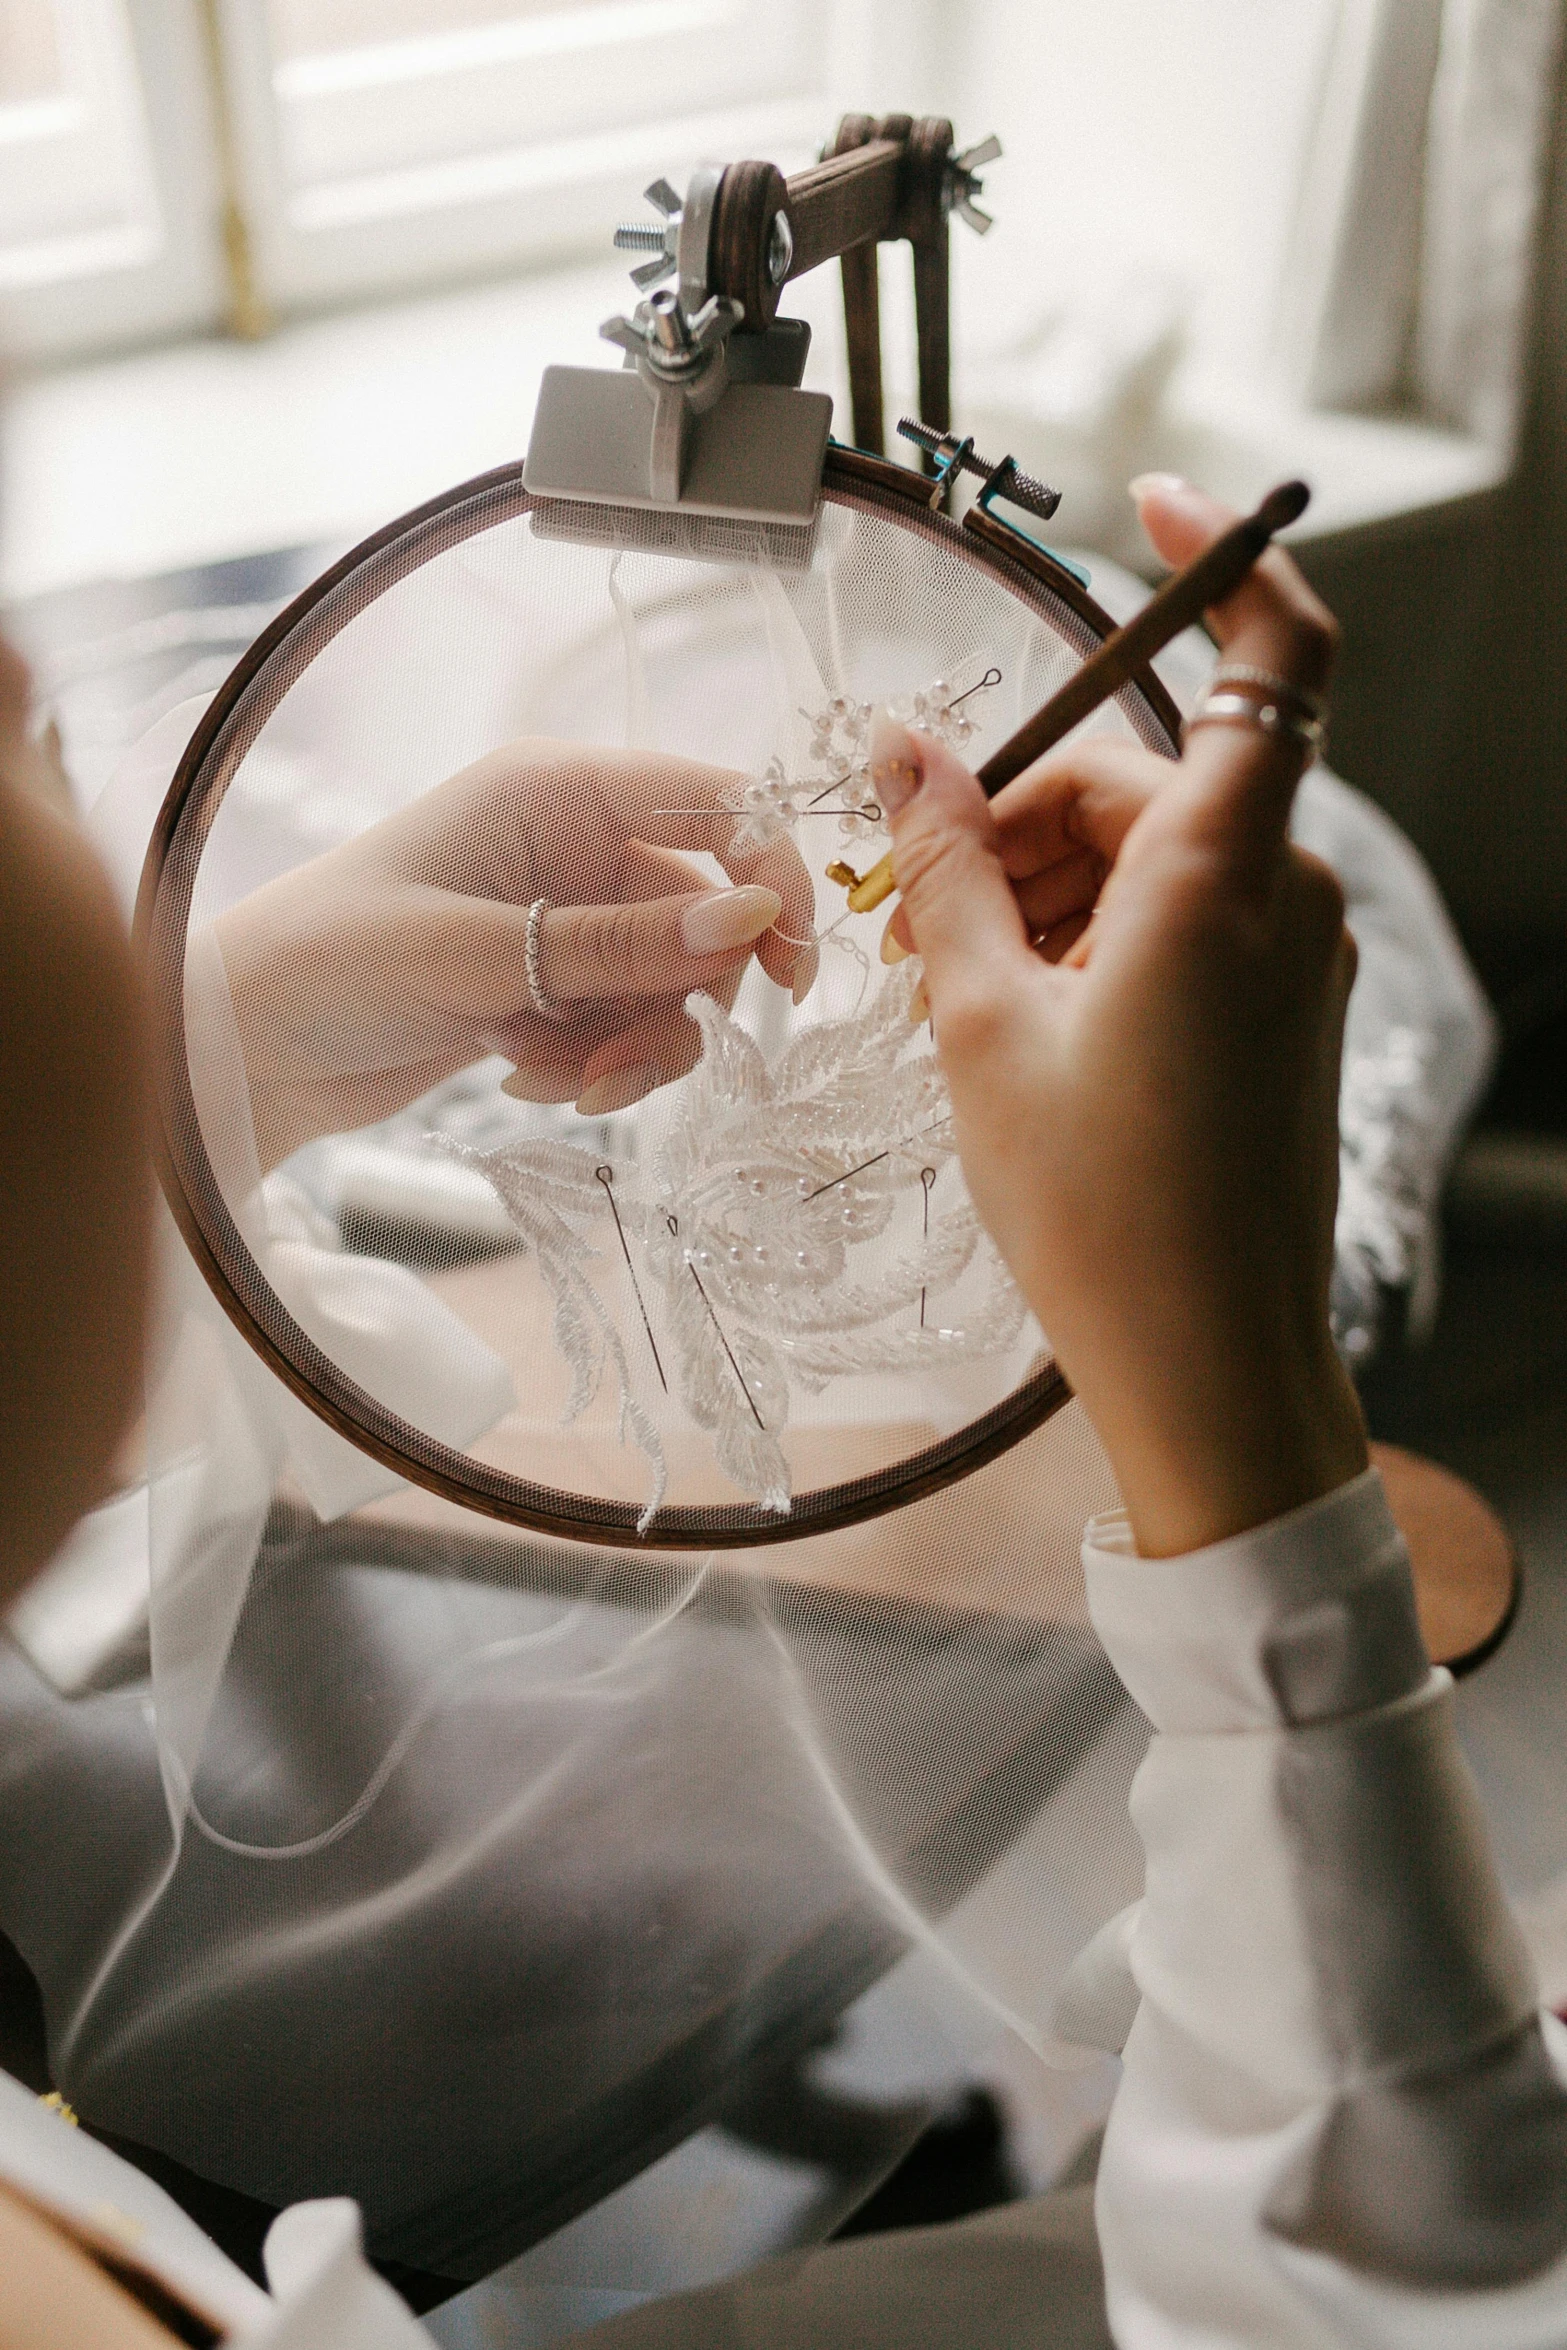 a woman is working on a piece of art, a cross stitch, pexels contest winner, transparent veil, wedding, wearing lab coat and a blouse, swirling